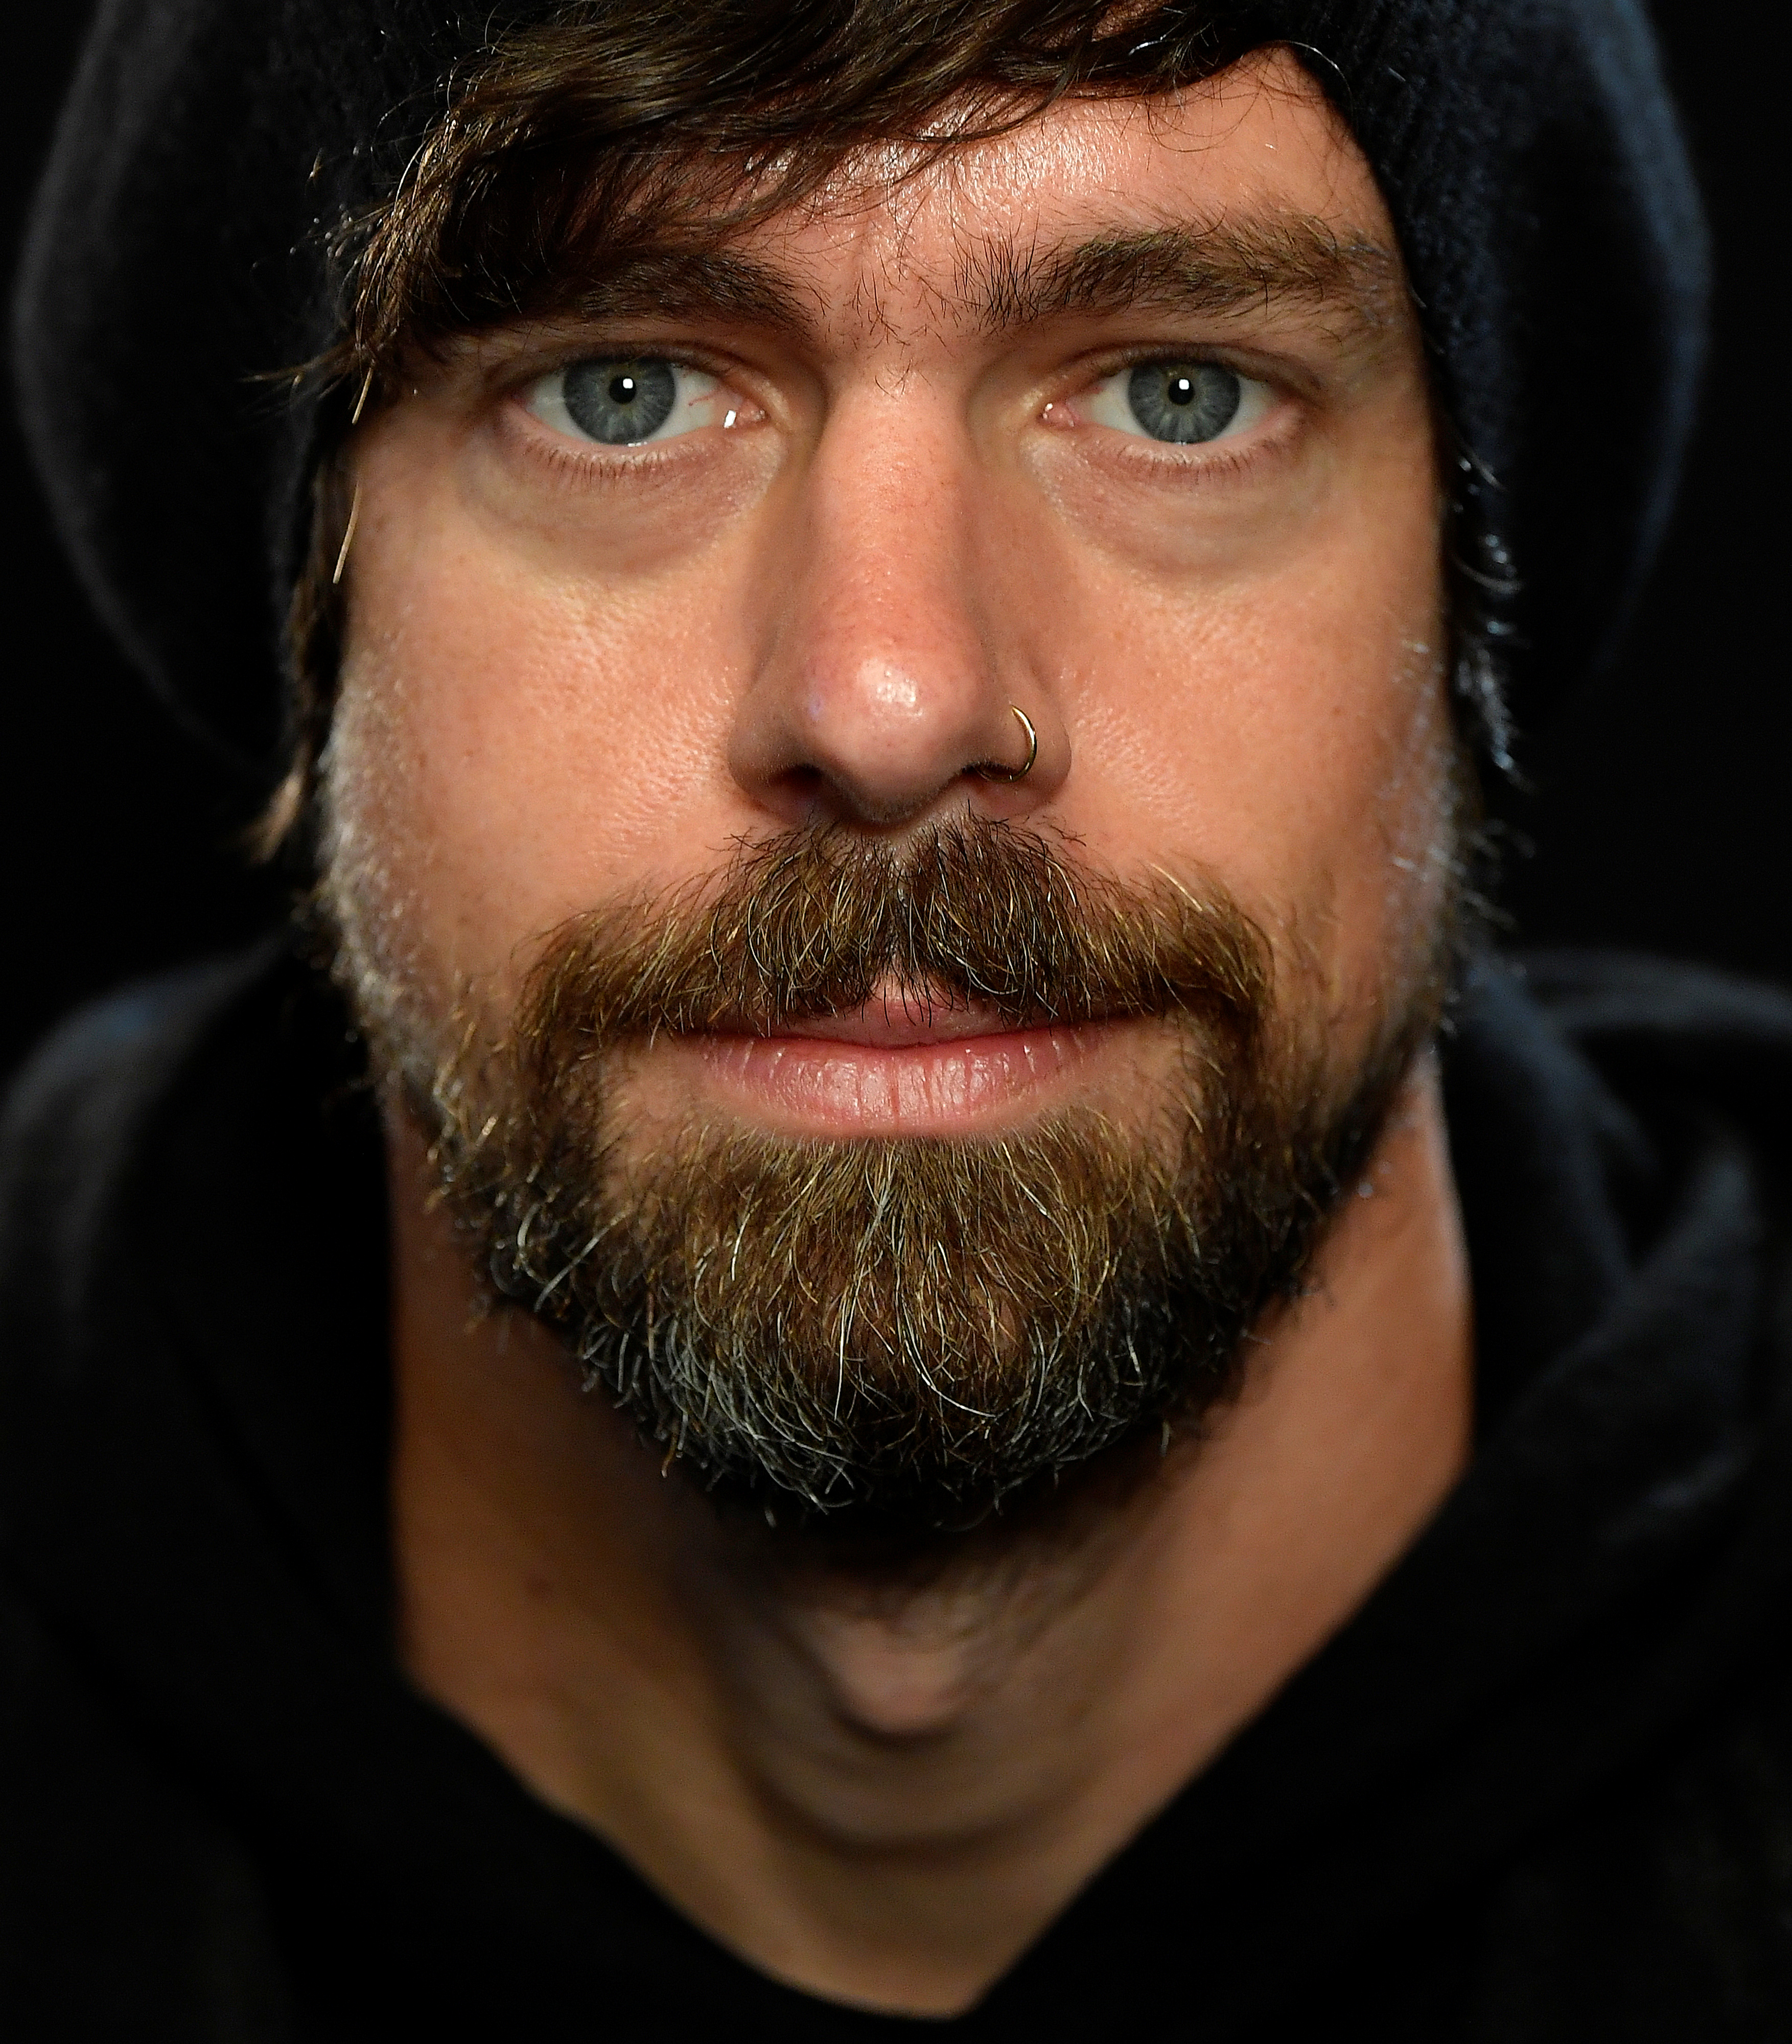 Dorsey, co-founder of Twitter and fin-tech firm Square, sits for a portrait during an interview with Reuters in London